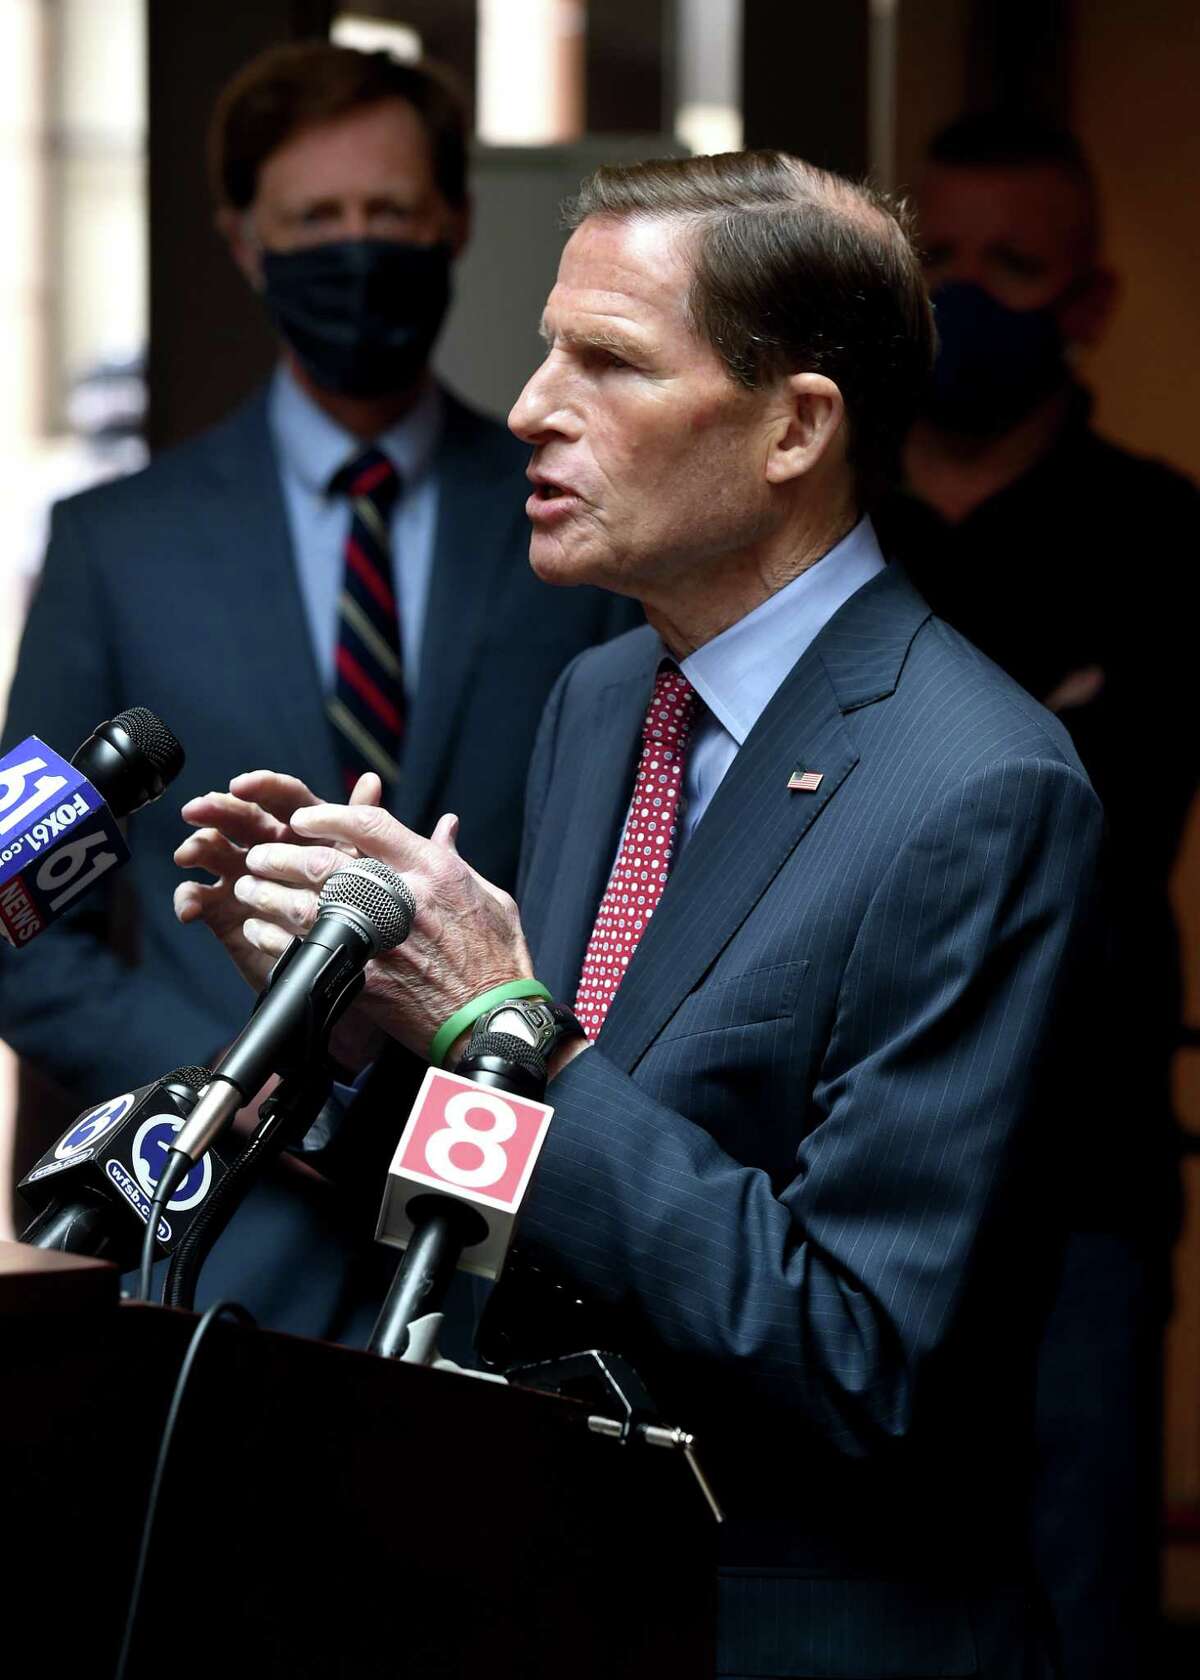 U.S. Senator Richard Blumenthal speaks about a gun buy back program during a press conference at City Hall in New Haven on April 16, 2021. The anonymous gun buy back with no IDs required will be held on Saturday April 17th from 10 a.m.-3 p.m. at 710 Sherman Parkway in New Haven where gift cards will be exchanged for the weapons. The buy back will also include BB guns.